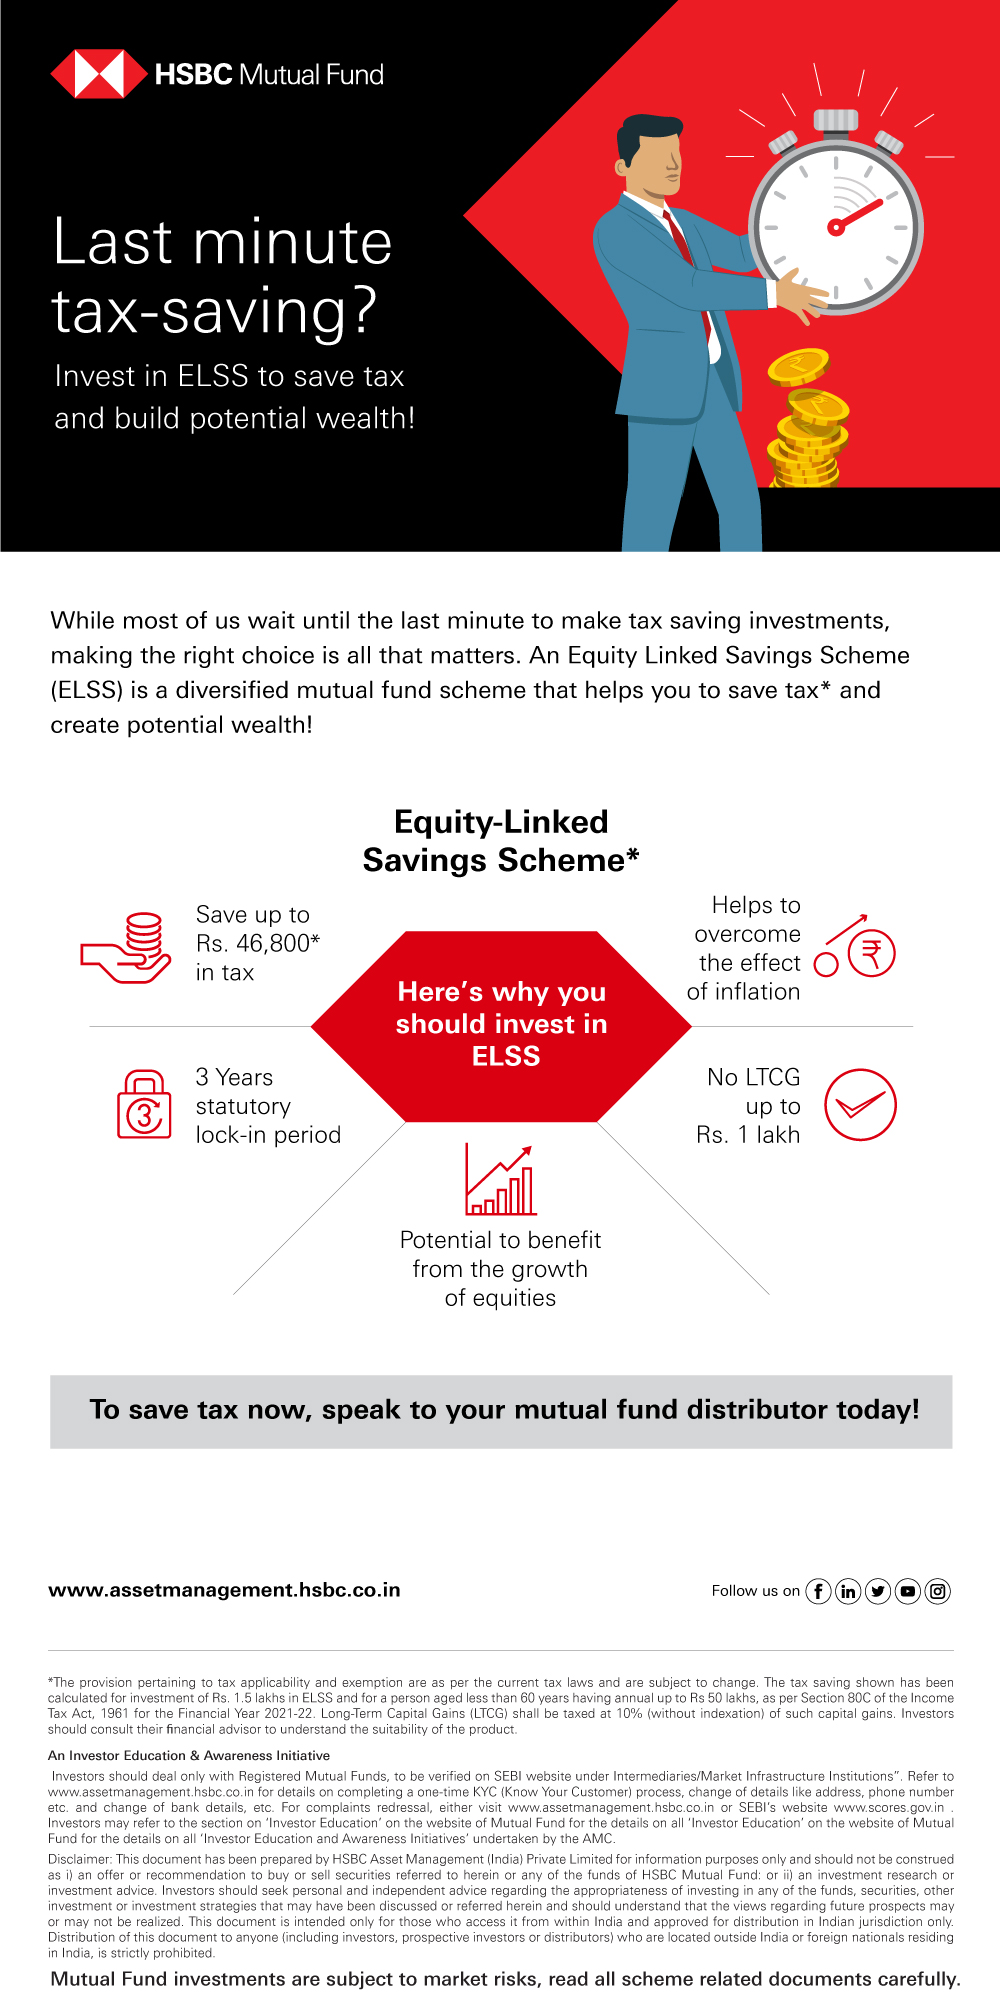 Last minute tax-saving? Invest in ELSS to save tax and build potential wealth!